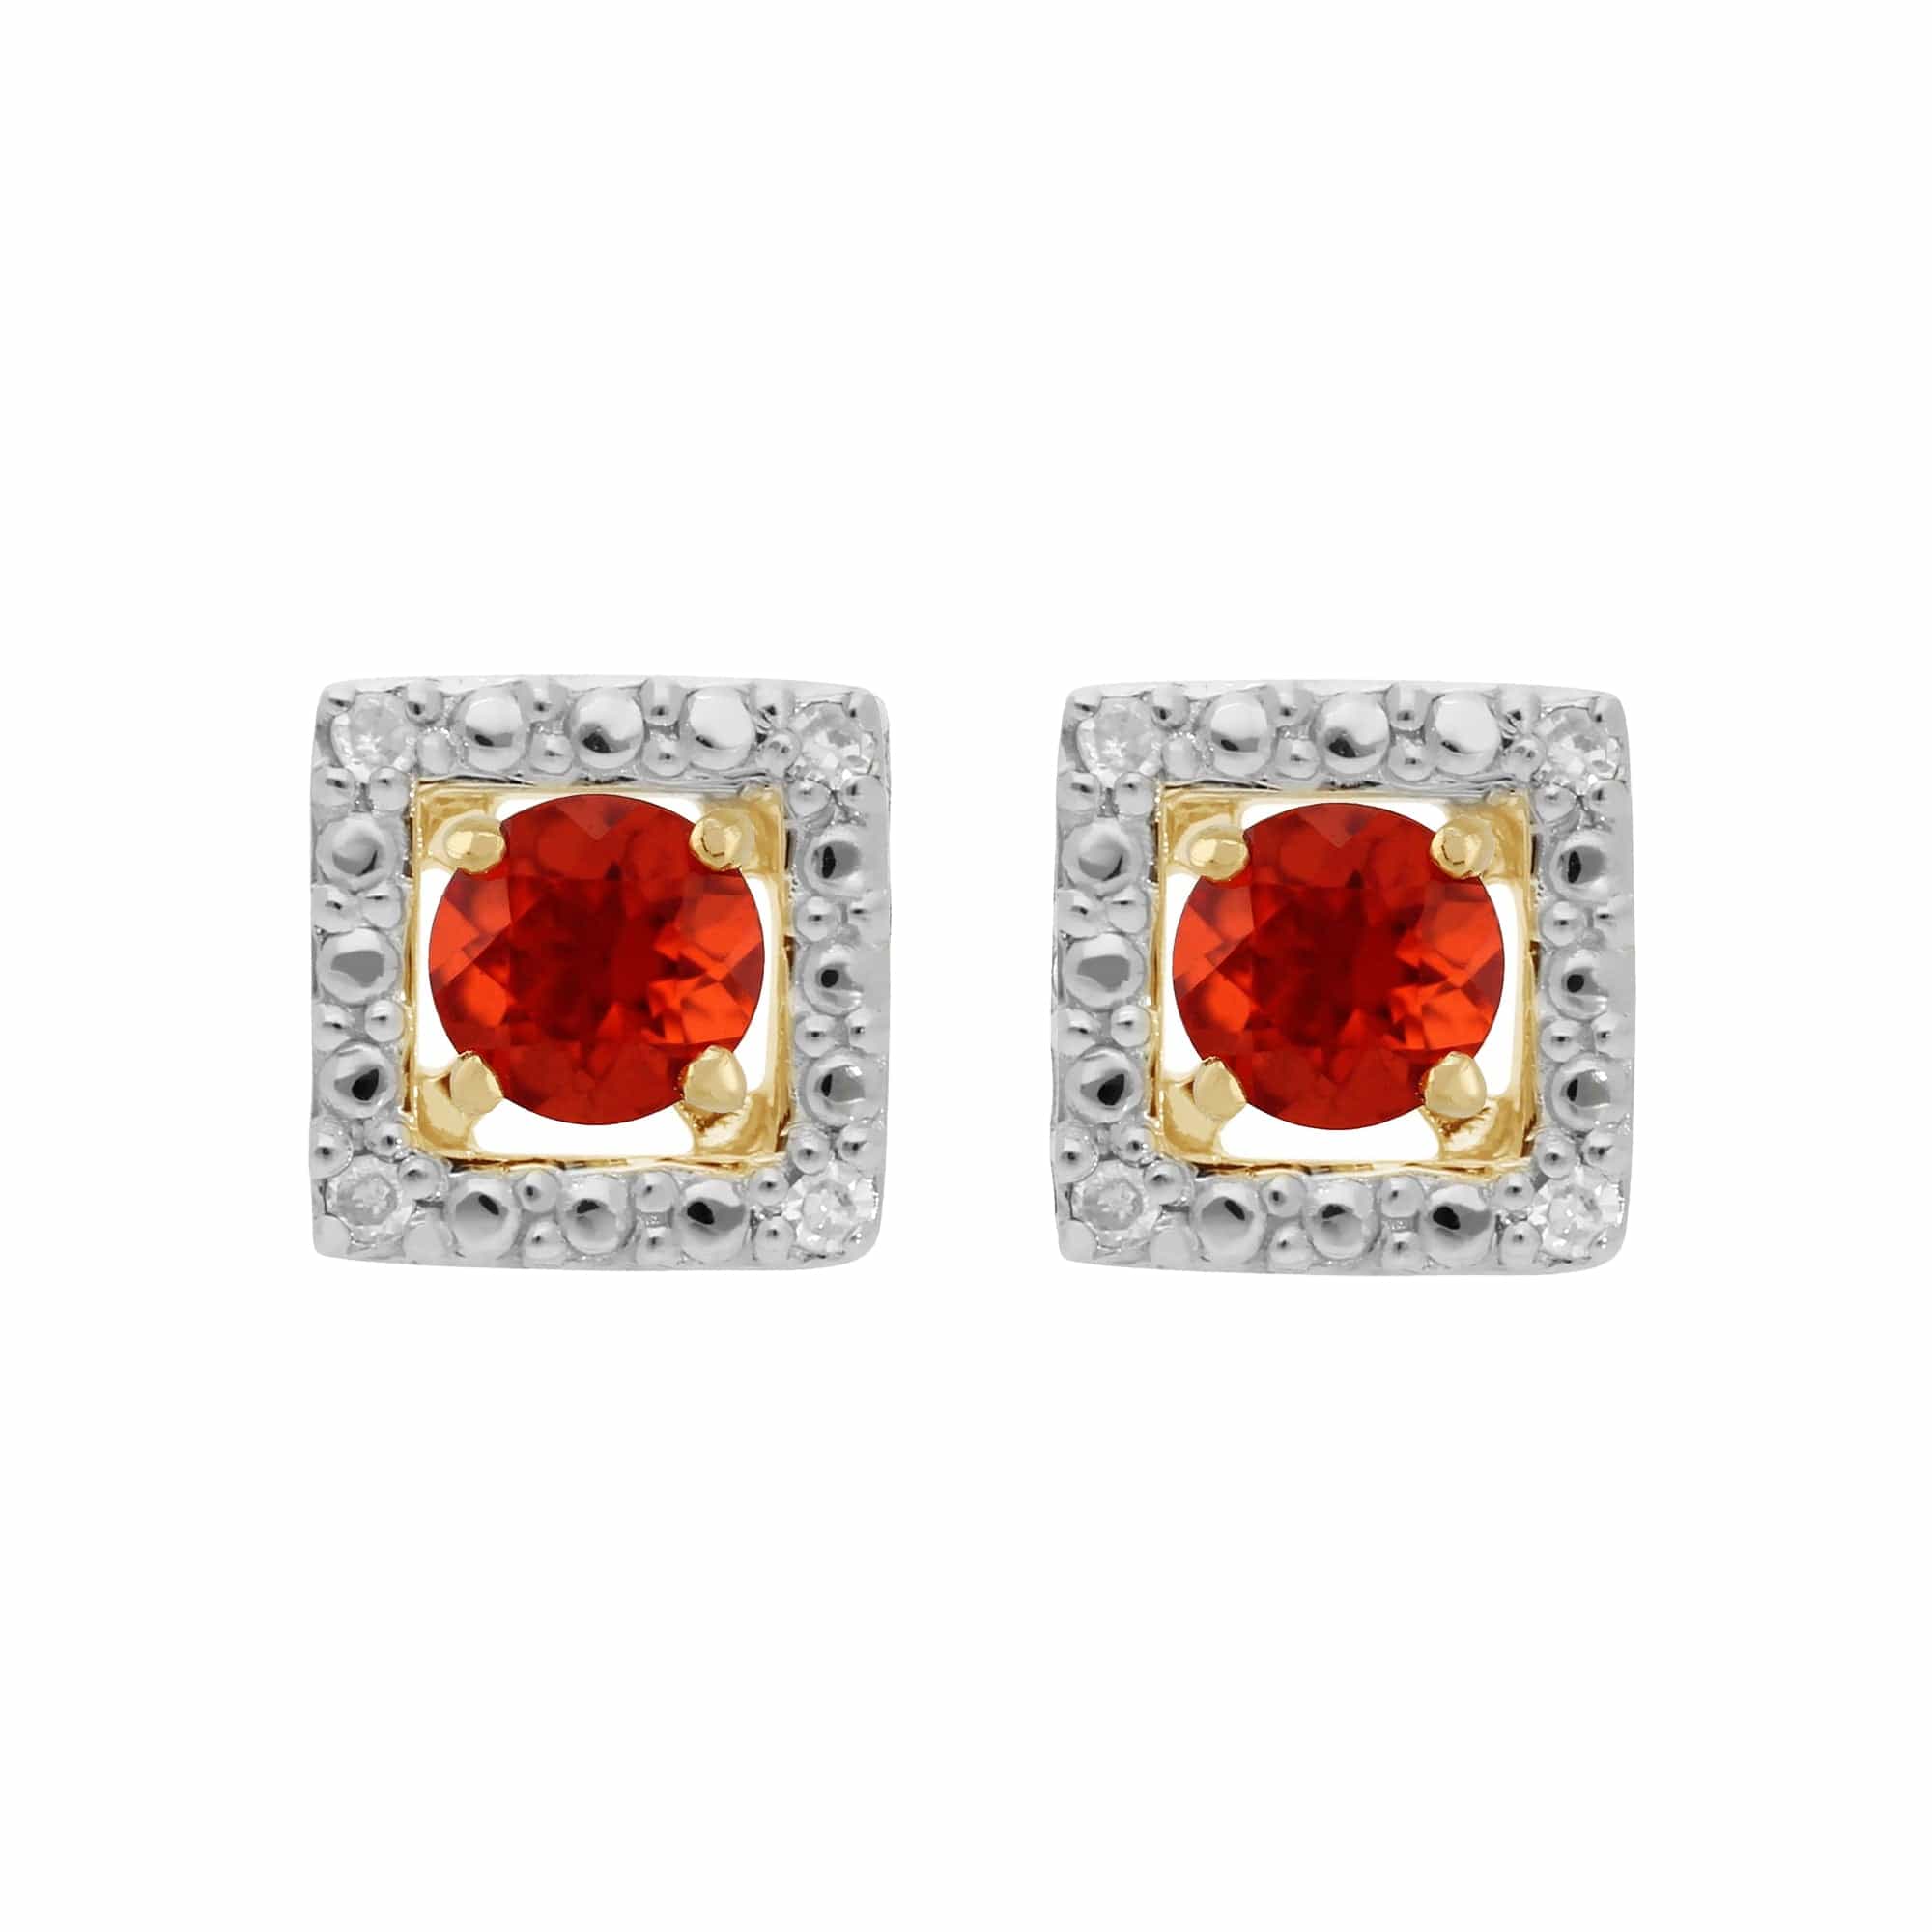 11561-191E0379019 Classic Round Fire Opal Stud Earrings with Detachable Diamond Square Earrings Jacket Set in 9ct Yellow Gold 1